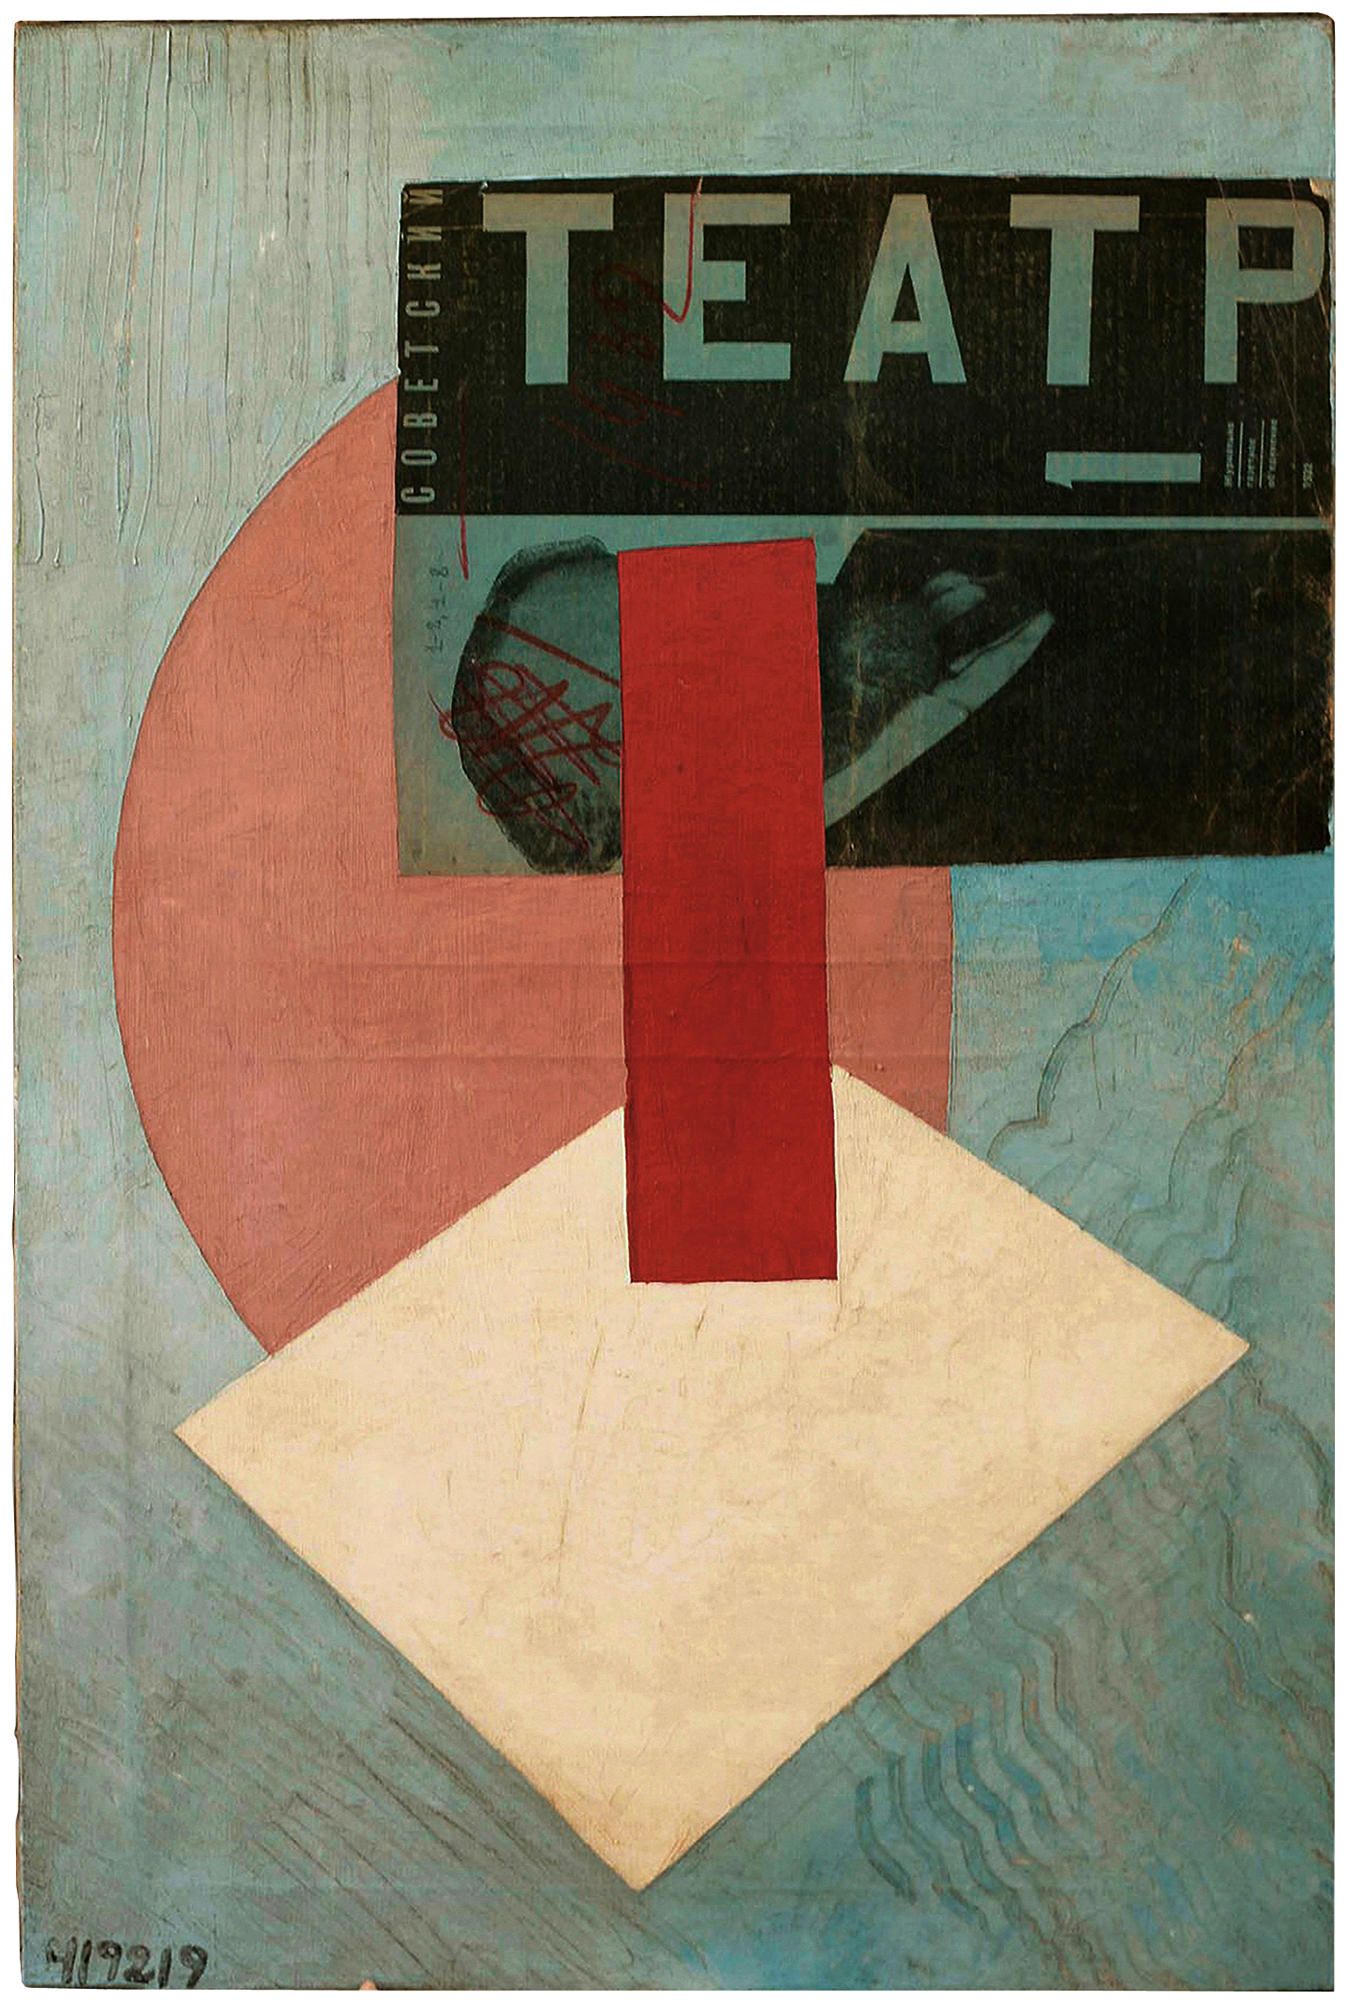  Unattributed. Unsigned. In the style of Nathan Altman.&nbsp;“419219” on the lower left front, with a page from Soviet Theater no 1 magazine, 1932. Mixed media on canvas.&nbsp;60 x 40 cm. 